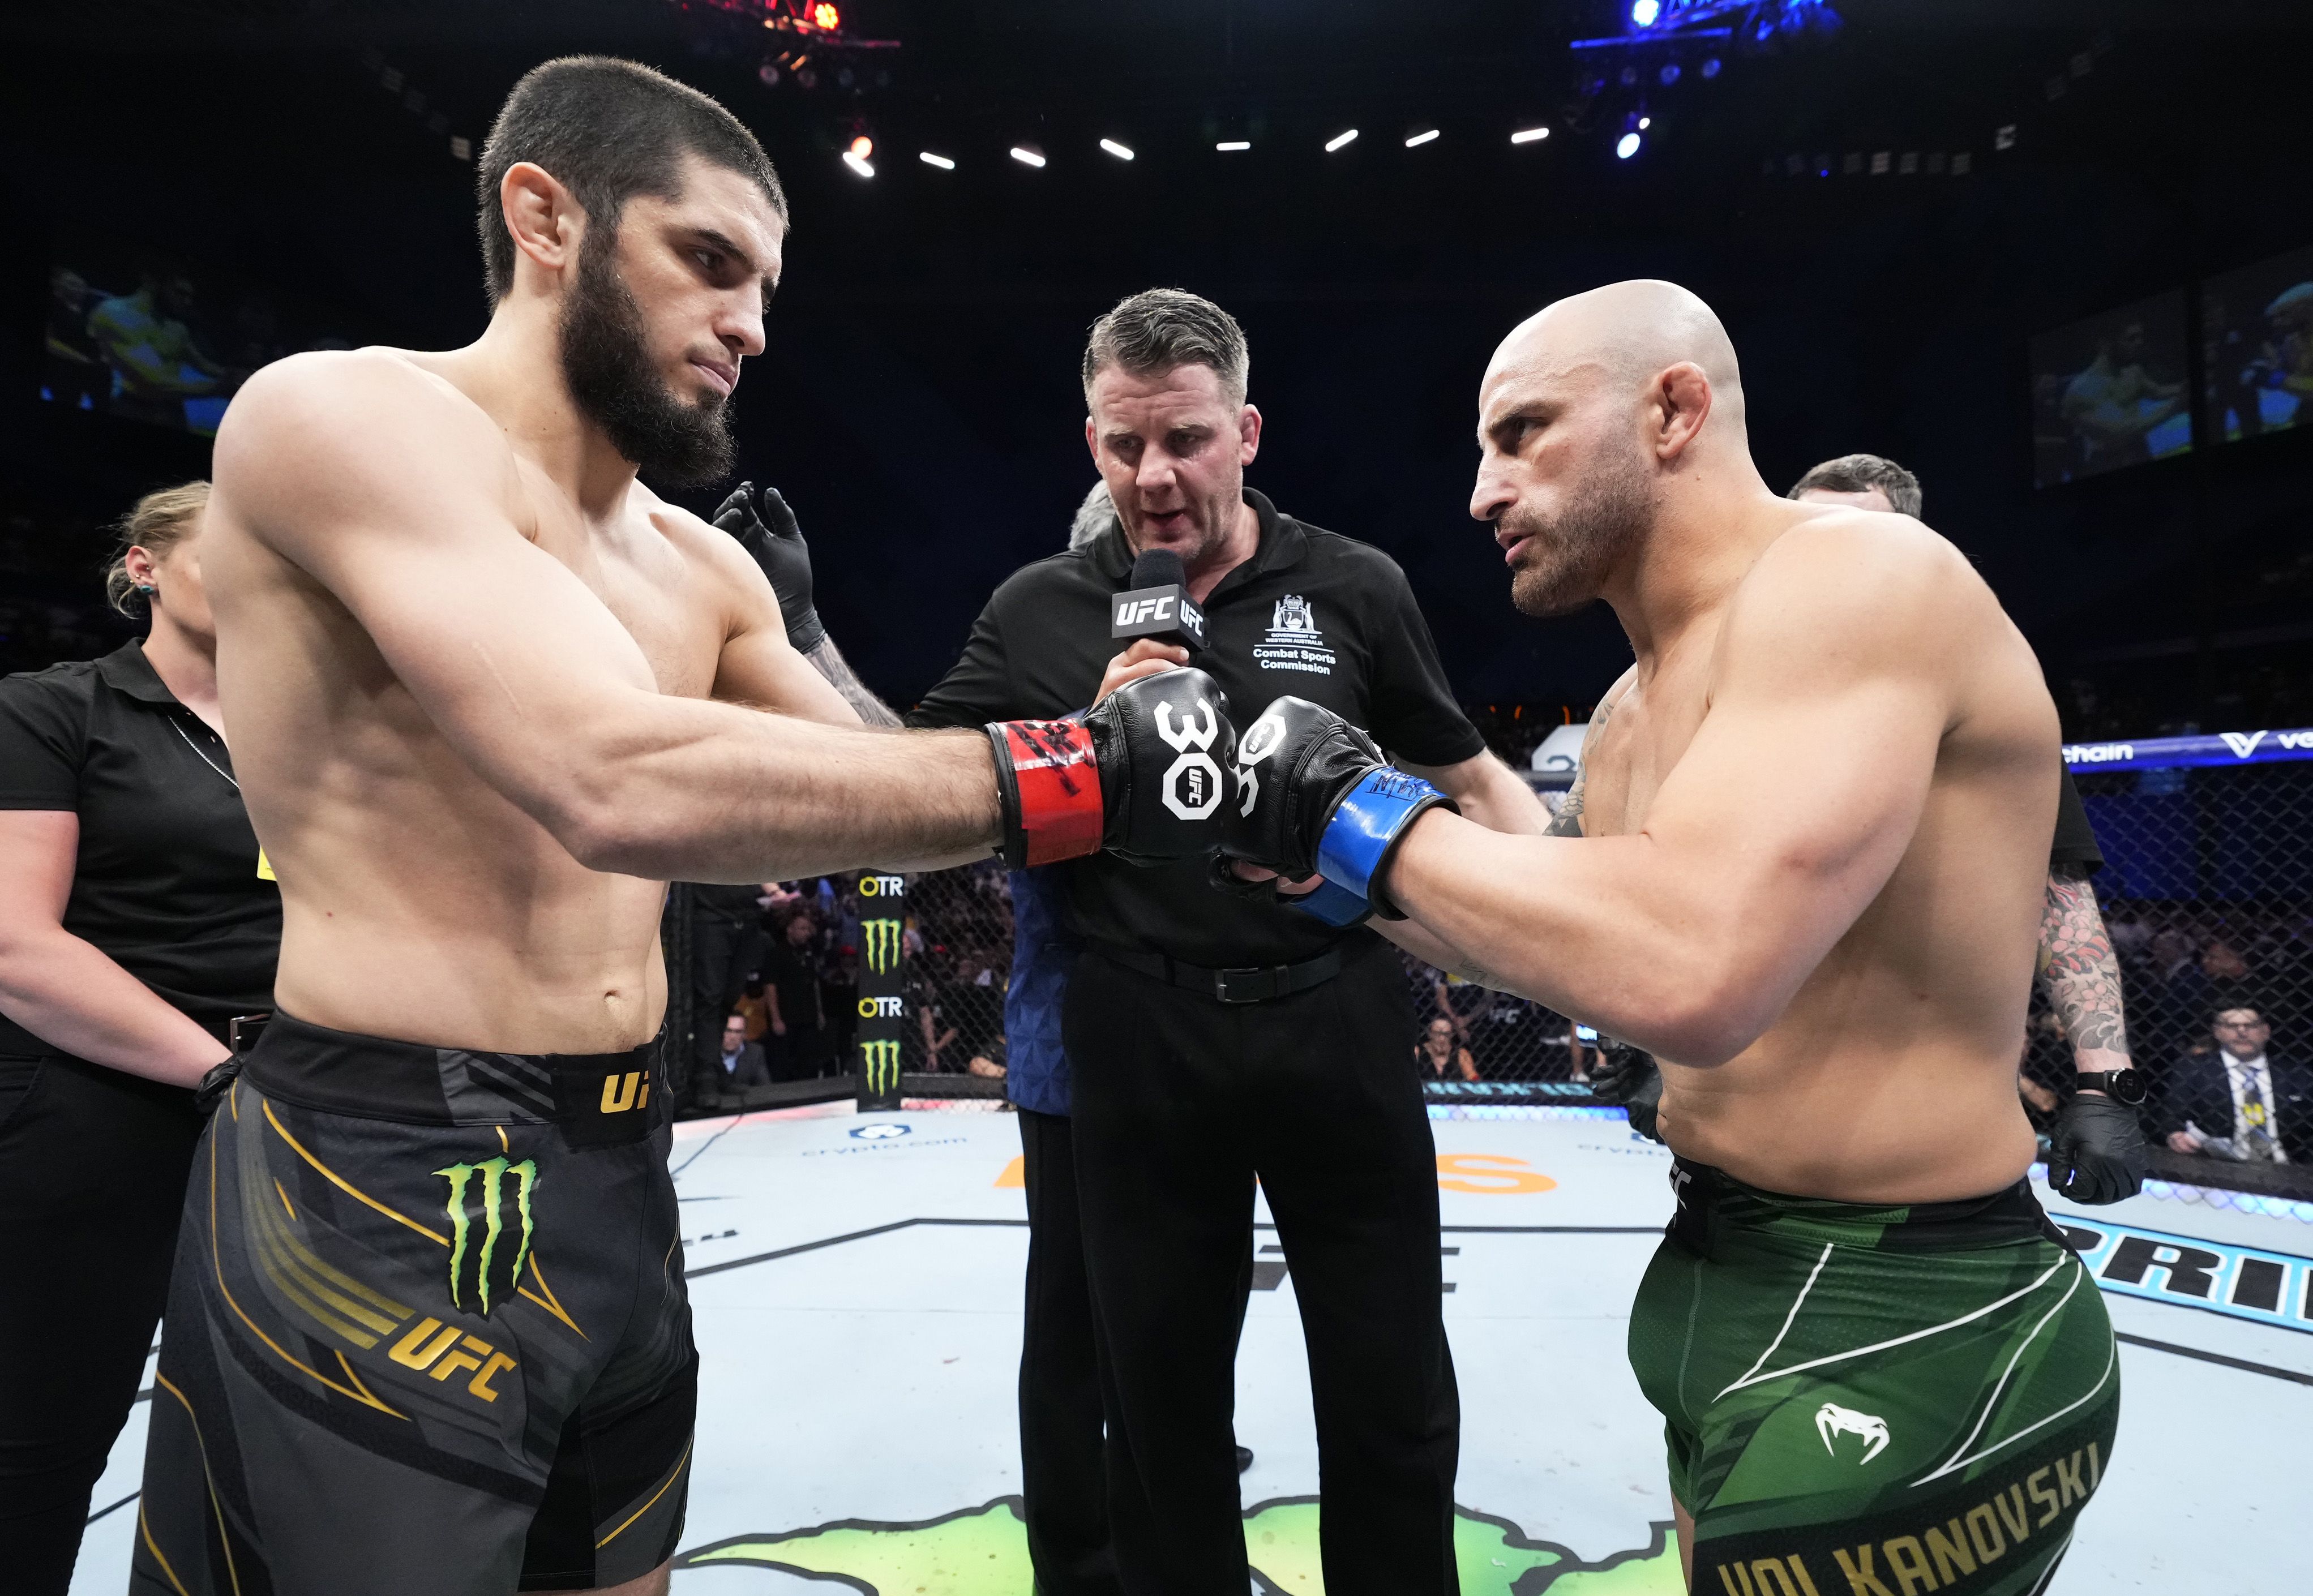 Makhachev and Volkanovski agree to rematch in Abu Dhabi immediately after the fight